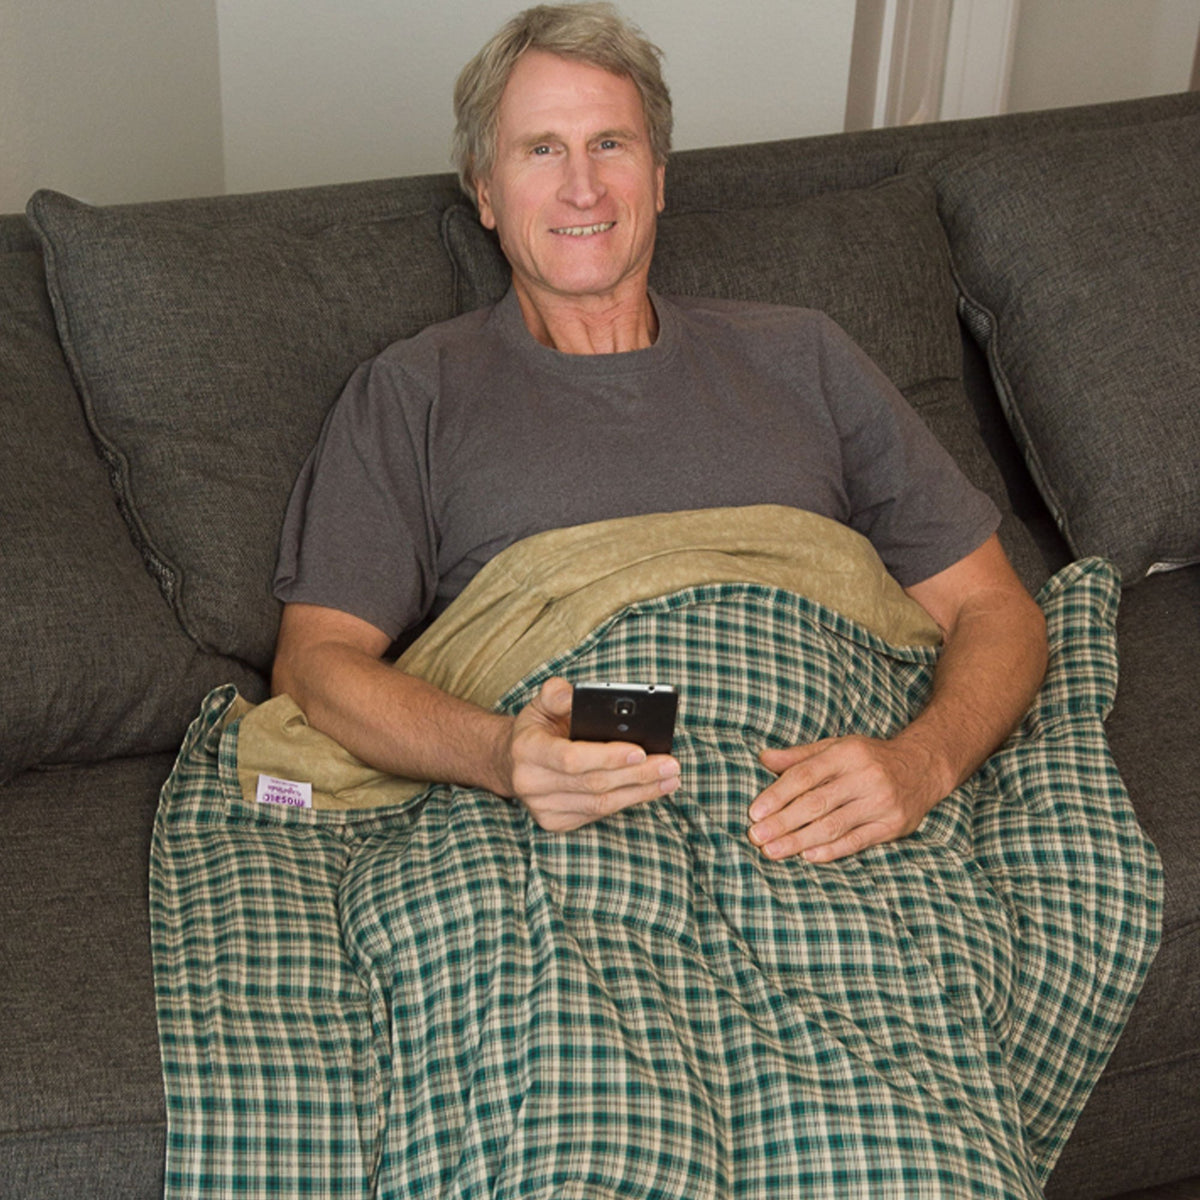 Man watches TV from under his Mosaic Weighted Blankets Green Khaki Plaid Cotton Weighted Blanket